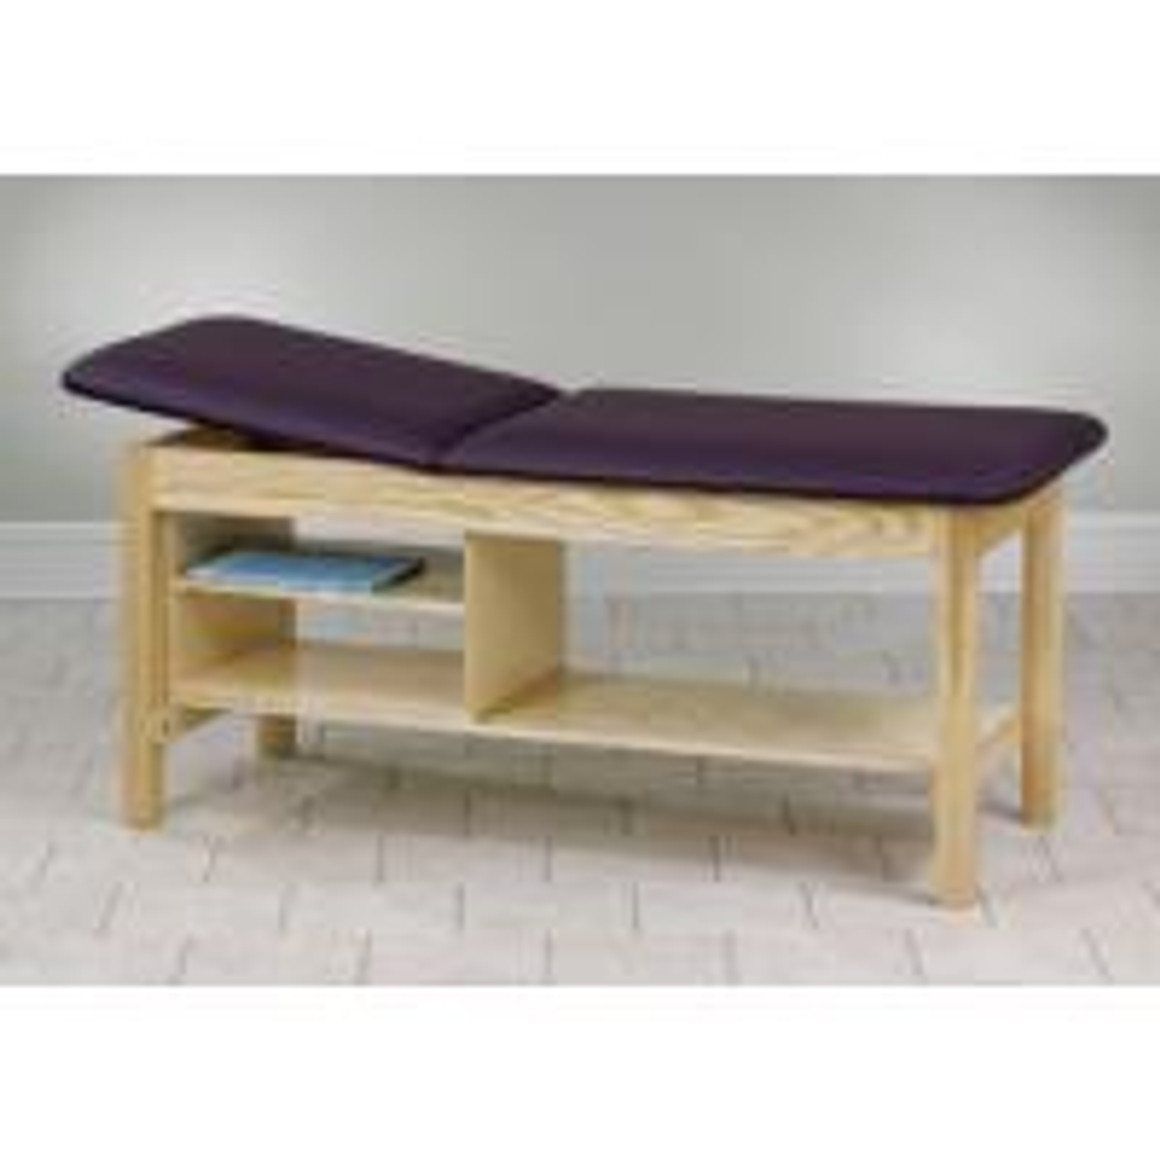 Clinton Classic Series Straight Line Treatment Table with Shelving Unit, 27" Wide, Viscaya Palm